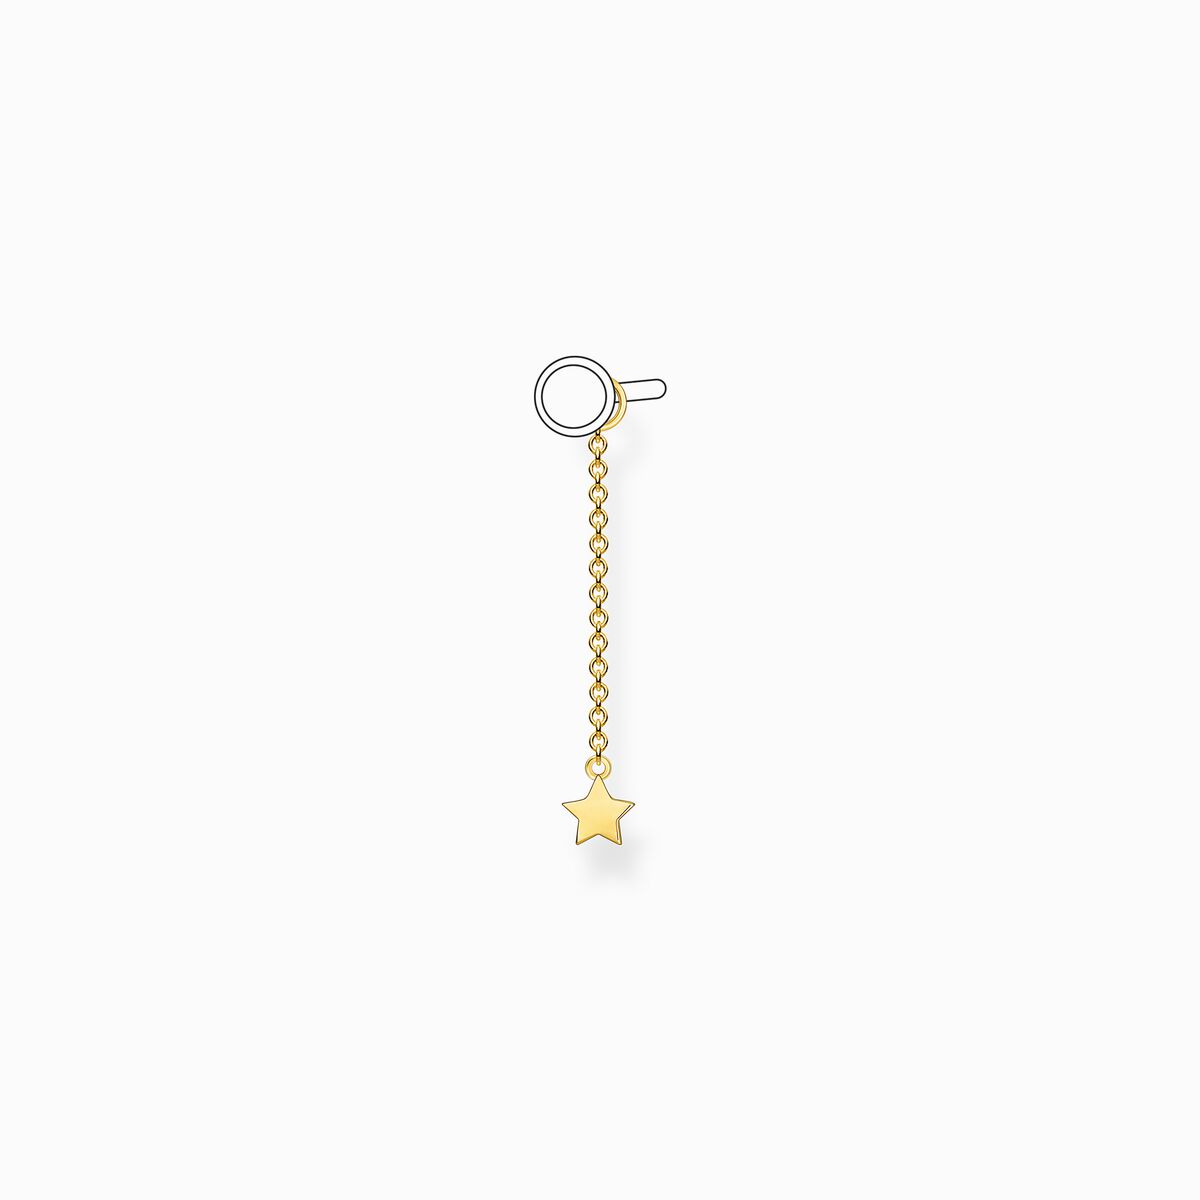 Golden earring pendant chain THOMAS SABO with –